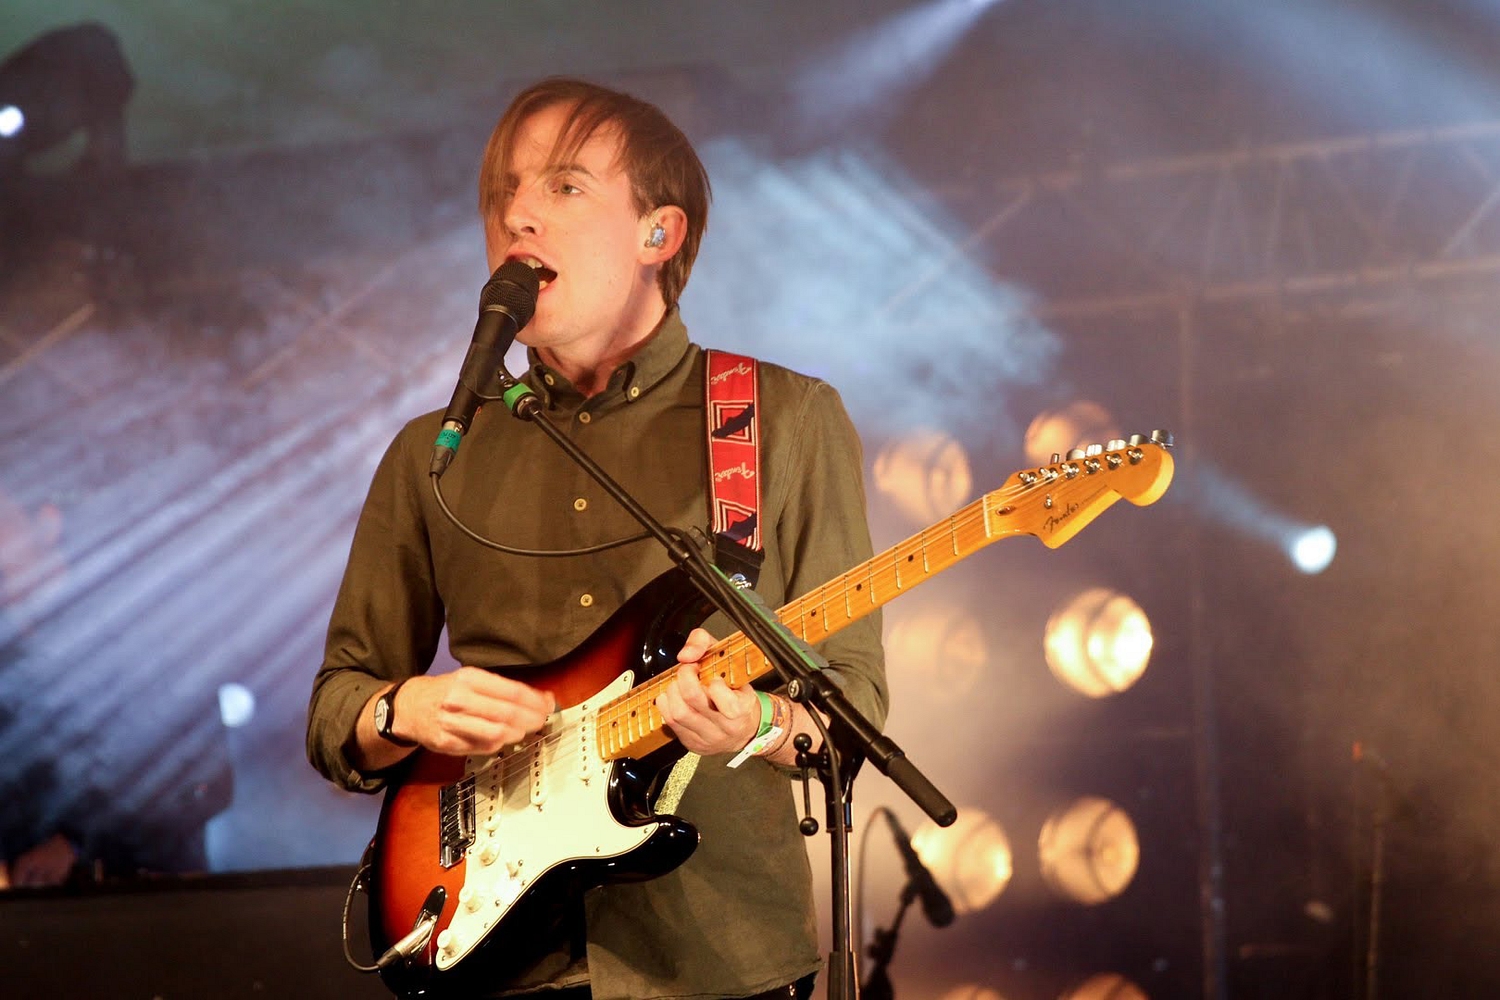 Watch Bombay Bicycle Club play the BBC Introducing stage at Glastonbury